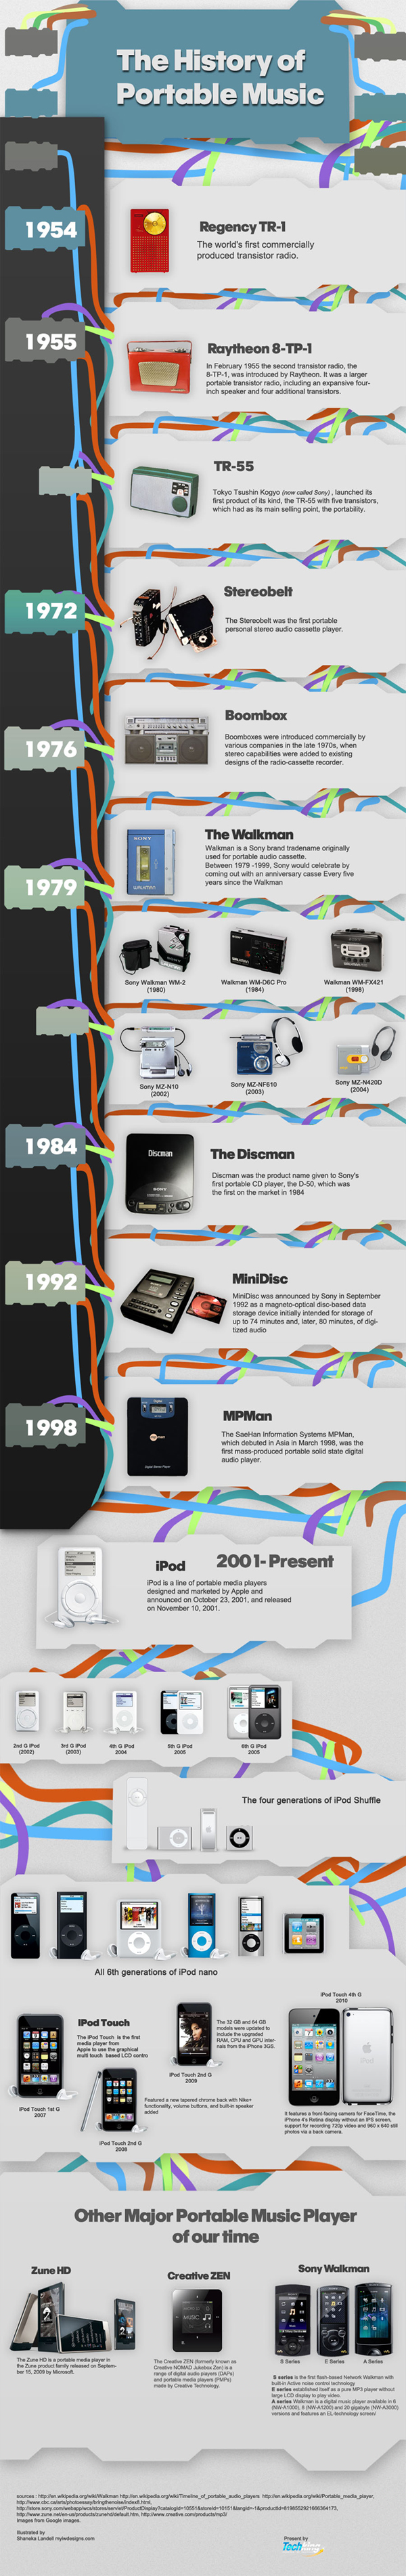 Infographic: Evolution of Portable Music